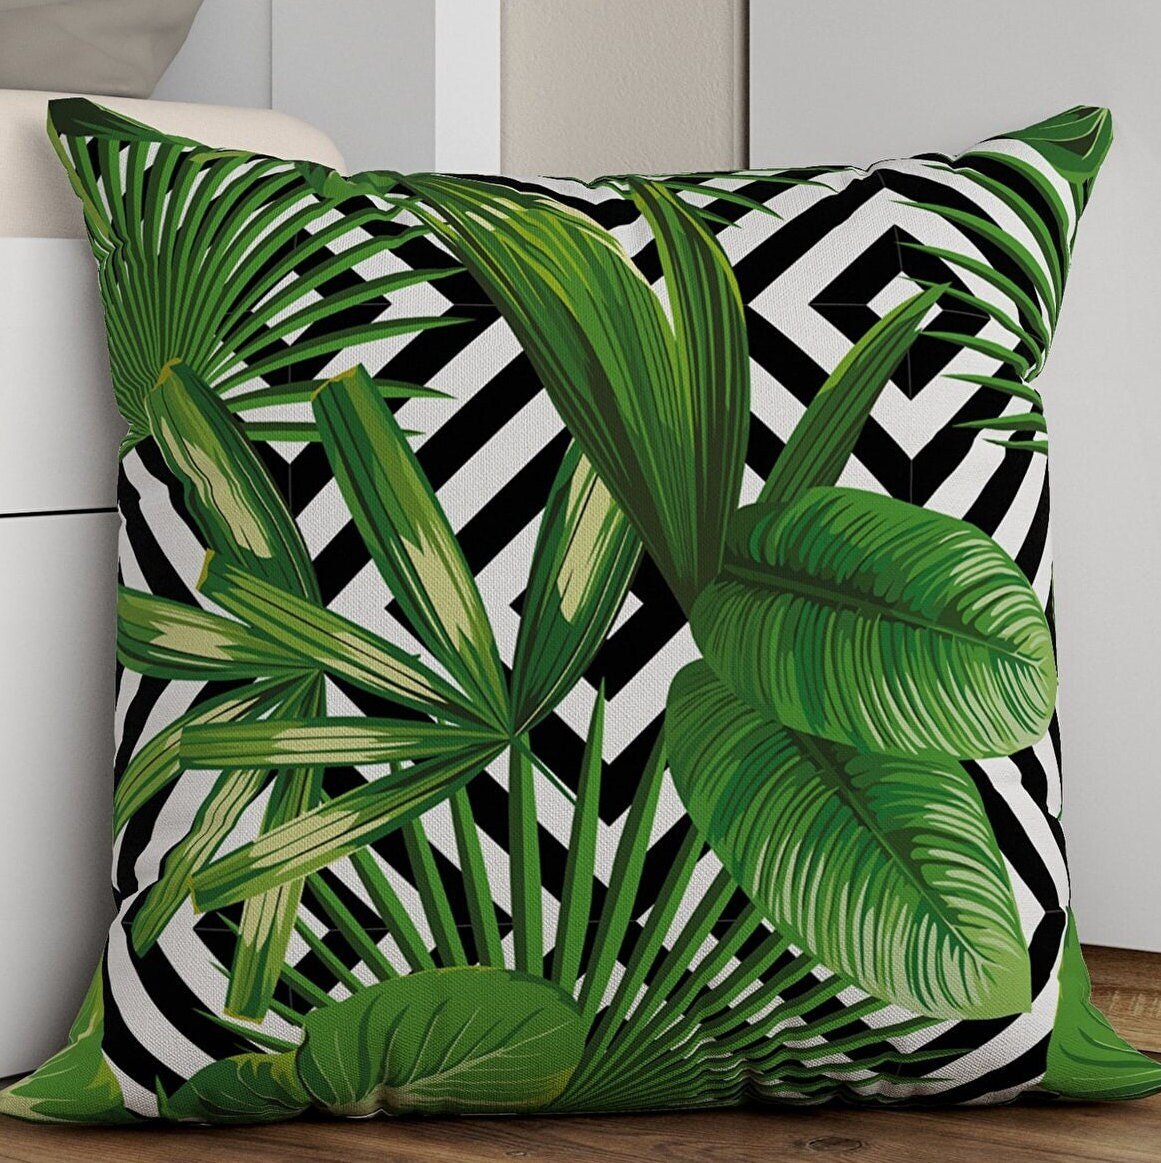 Set of 4, Green Tropical Cushion Cover with Palm Leaves, Botanical Floral Cushion Cover, Square Jungle Vibe Tropical Style, Gift - 43X43 - Babila Home